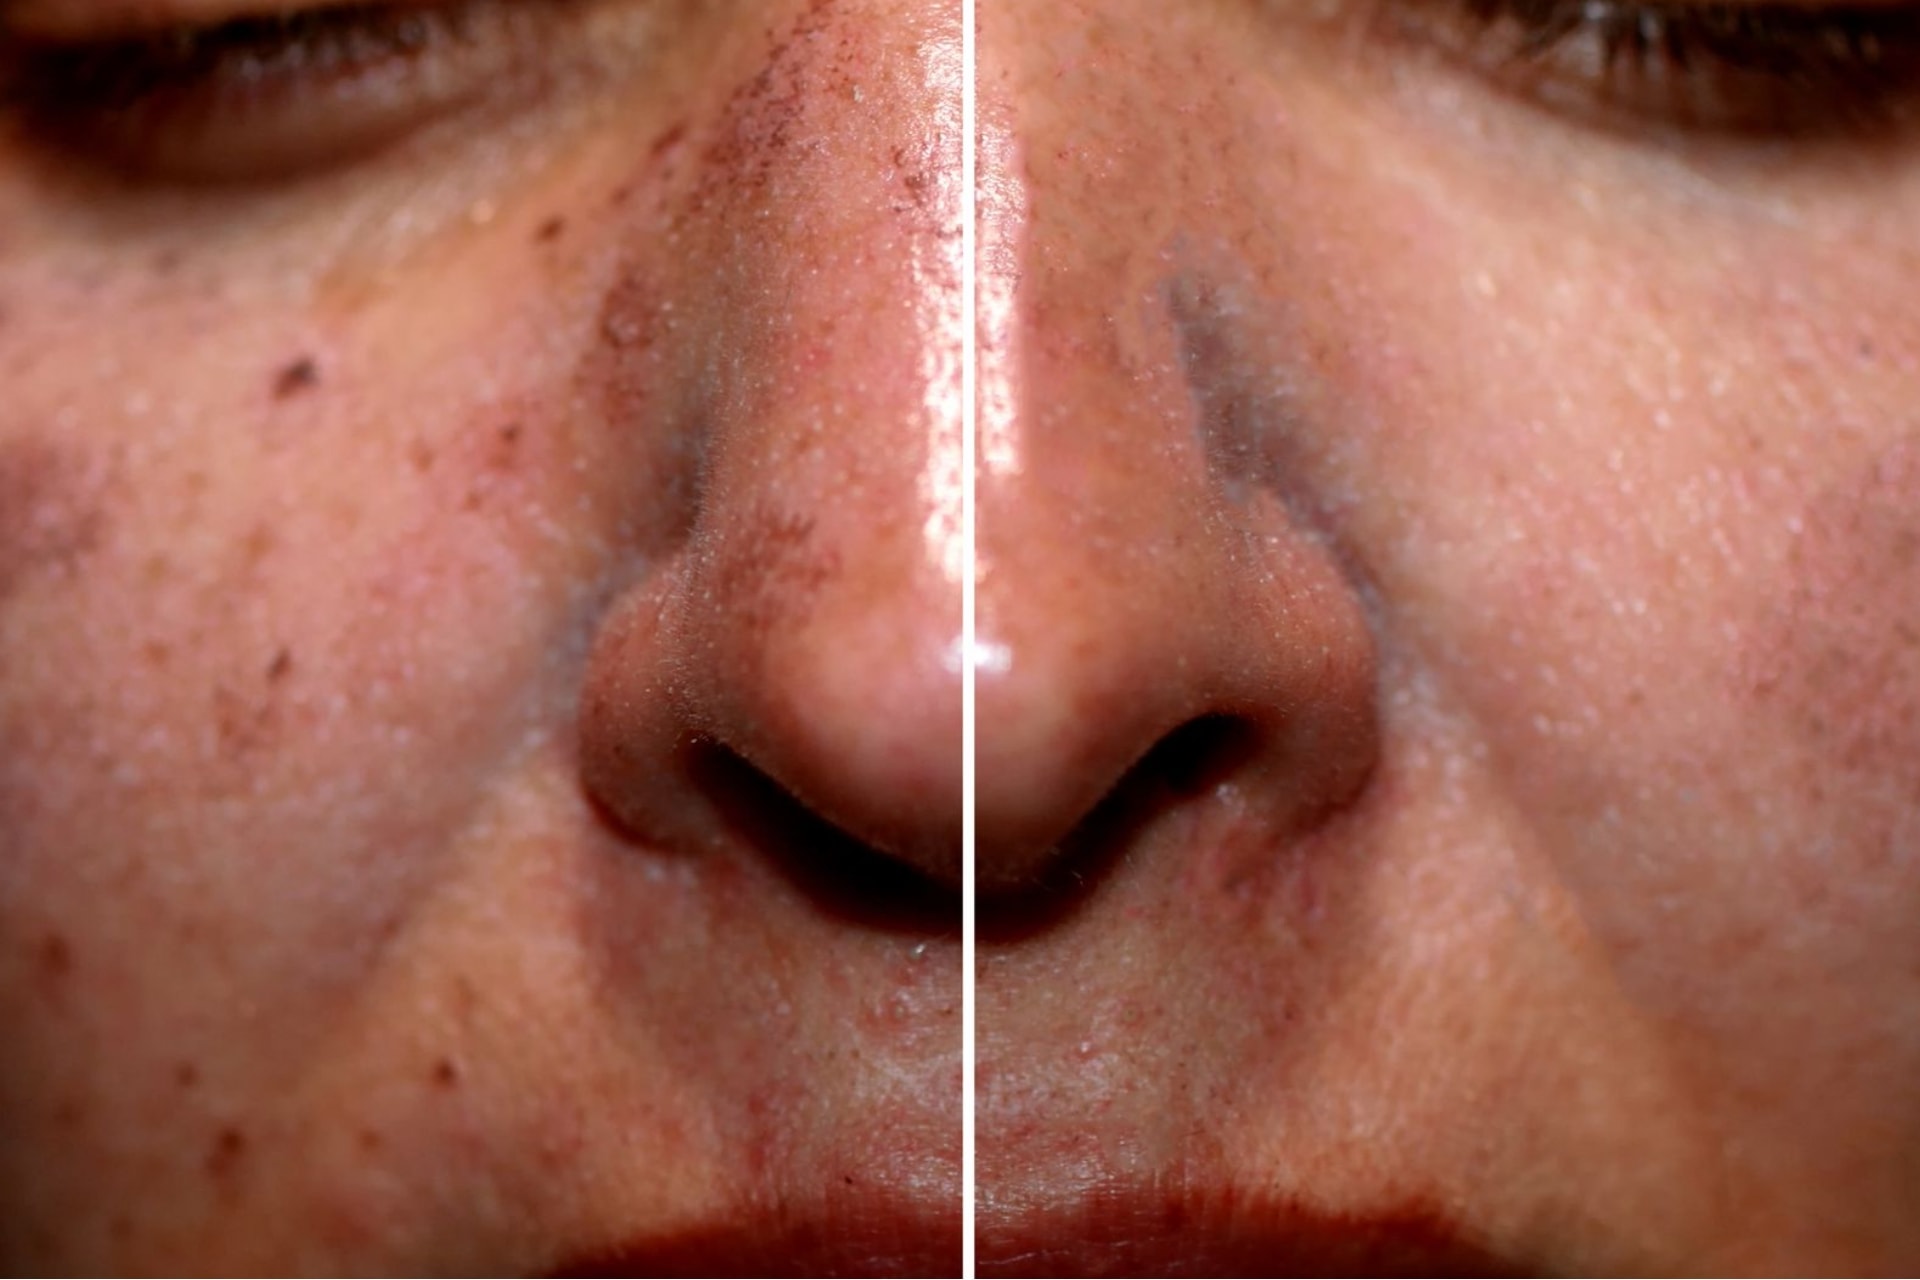 sun damaged skin before and after laser treatment